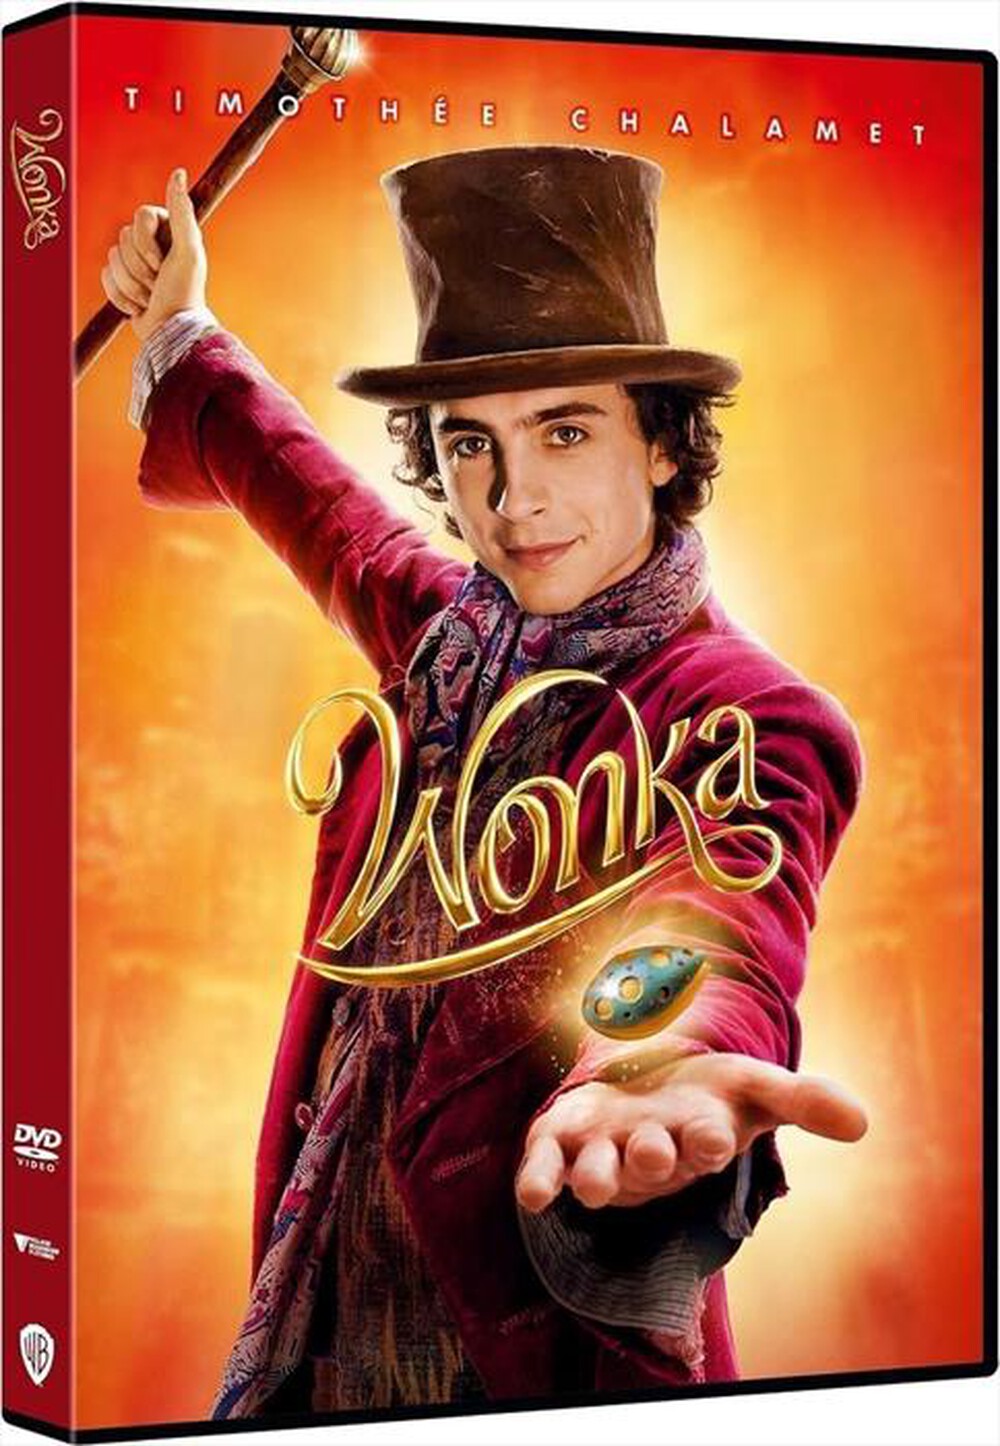 "UNIVERSAL PICTURES - Wonka"